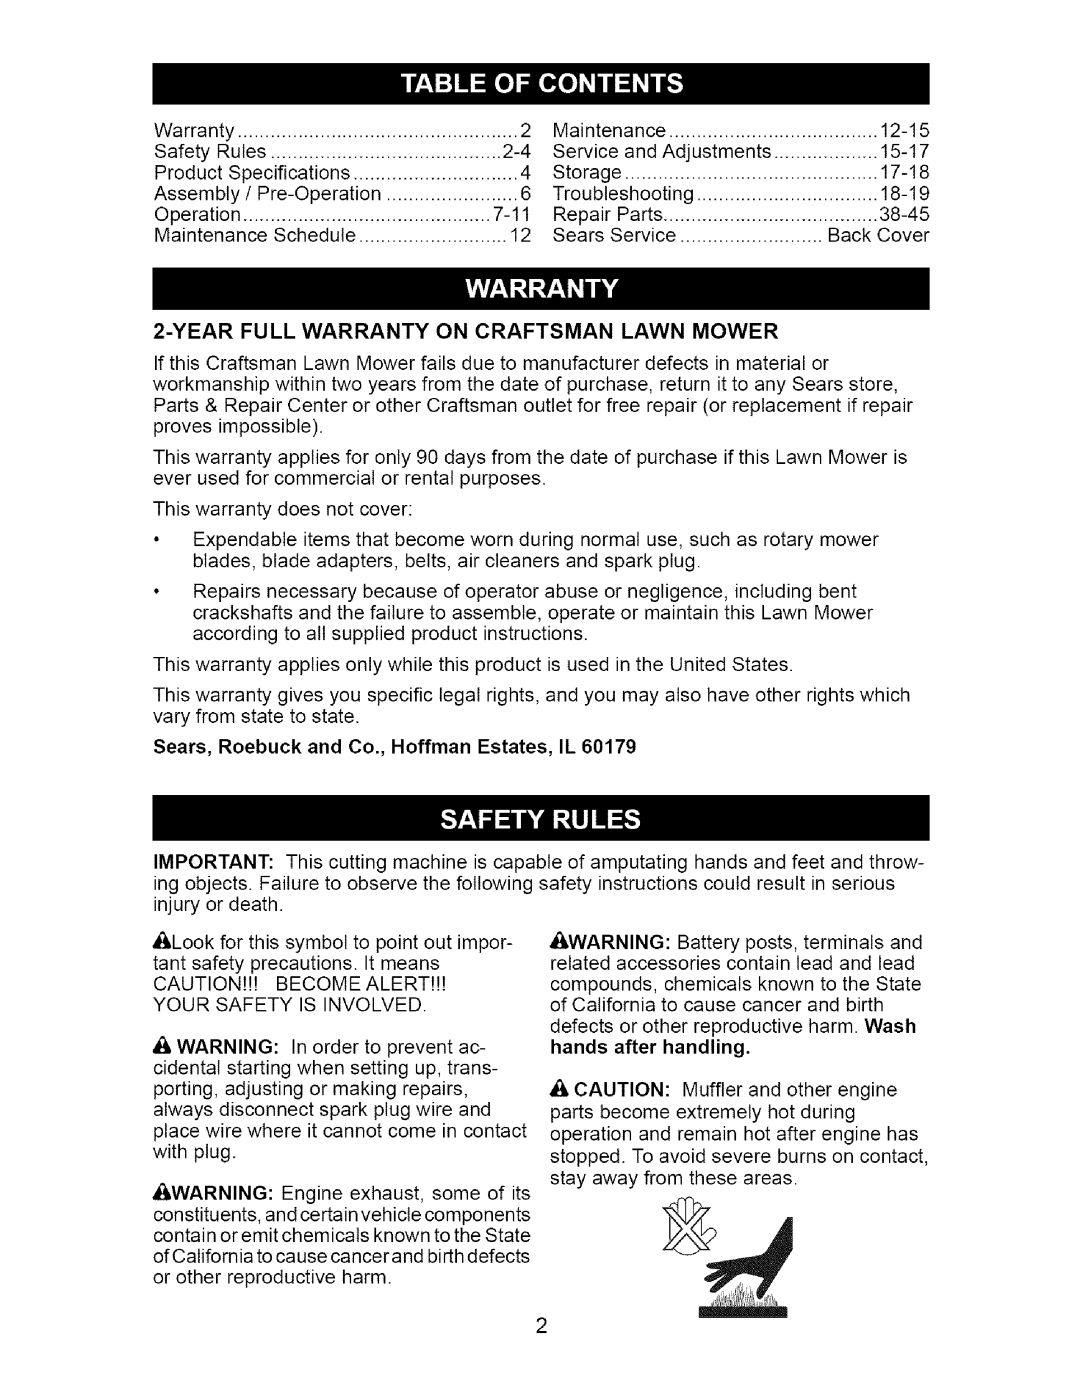 Craftsman 917.37172 owner manual Yearfull Warranty On Craftsman Lawn Mower, Sears, Roebuck and Co., Hoffman Estates, IL 